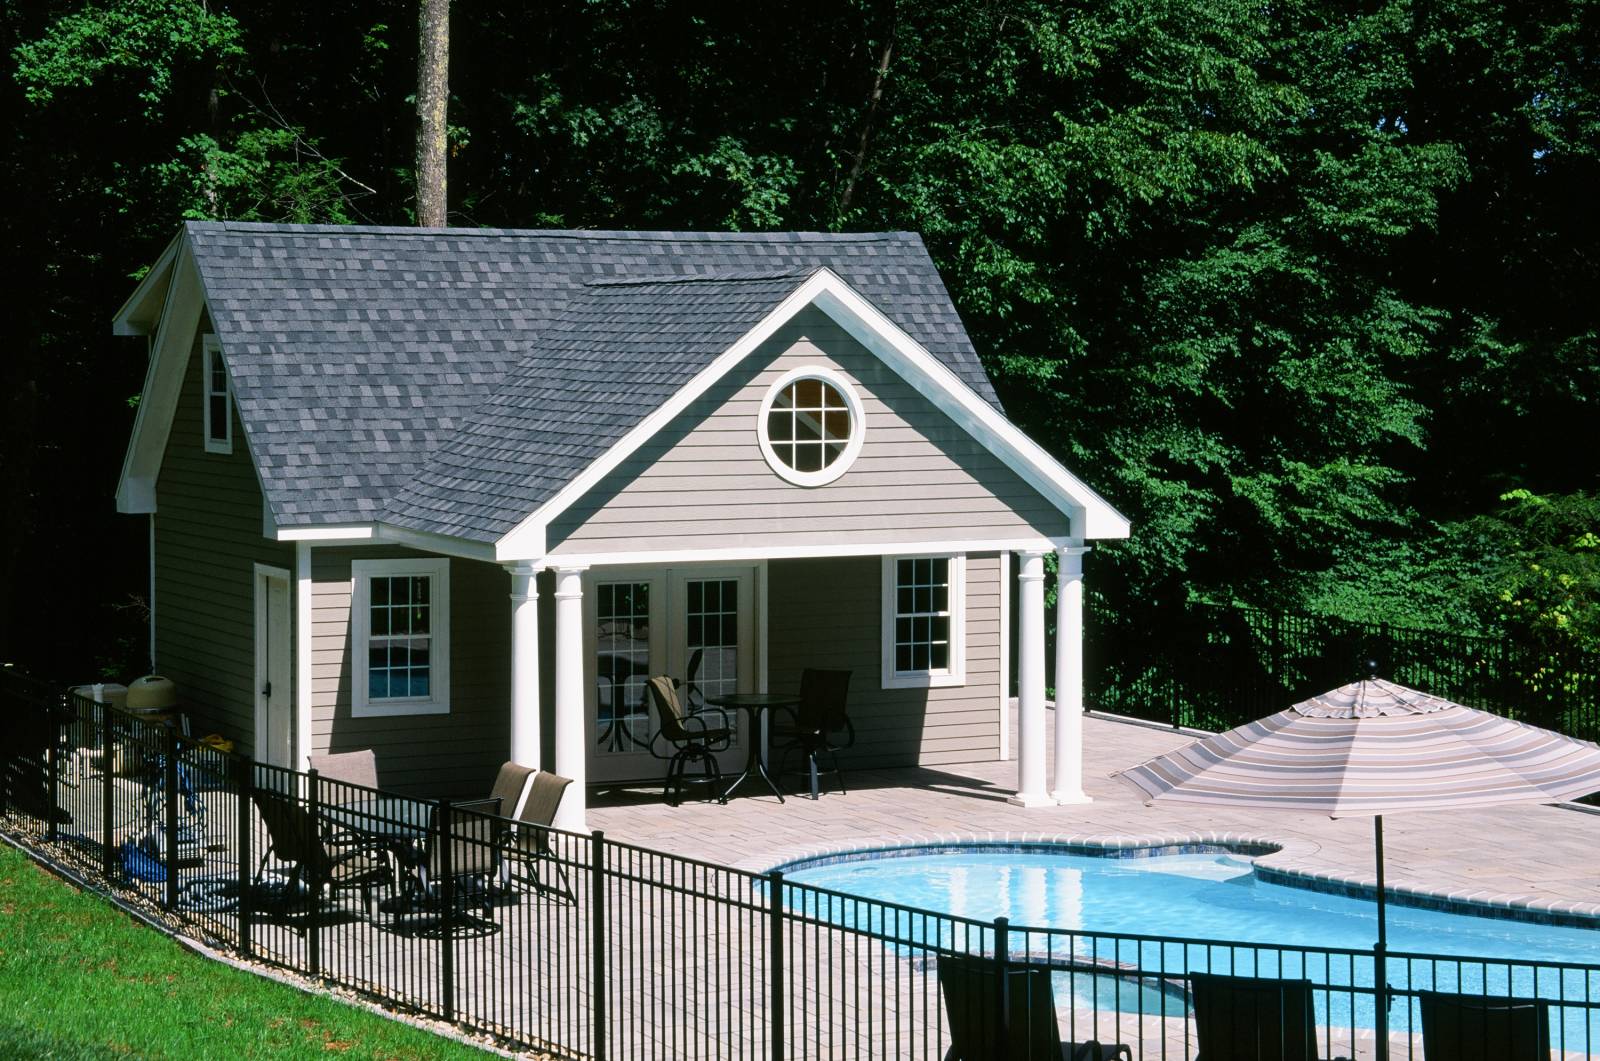 16' x 24' pool house • 18' x 10' front overhang with vaulted ceiling • LP Smart Siding • Harvey vinyl insulated windows • French doors